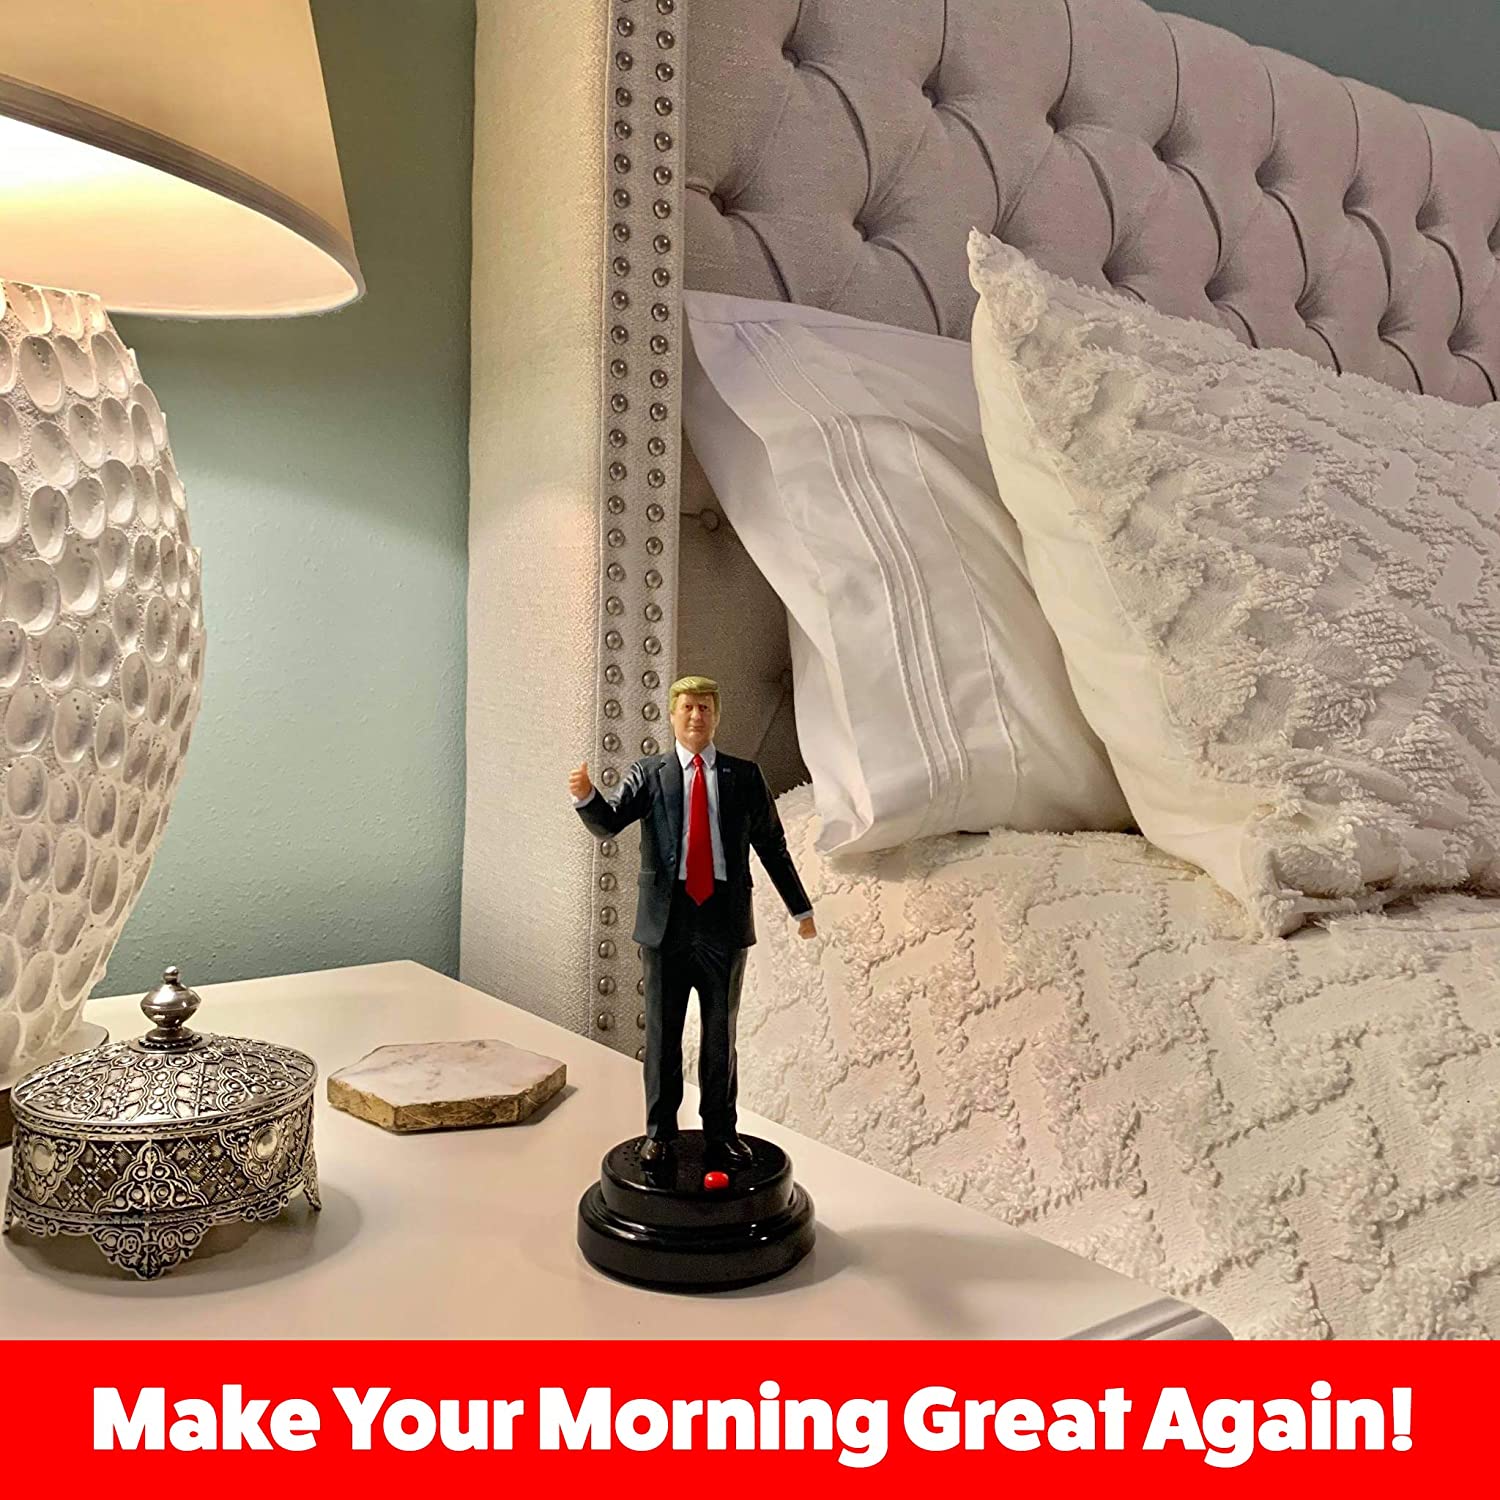 Donald Trump Talking Figure - says 17 Different Audio Lines in Trump's Own Voice - Loaded with His Funniest and Most Memorable Quotes - Beautifully Sculpted - Includes Batteries - Collectible